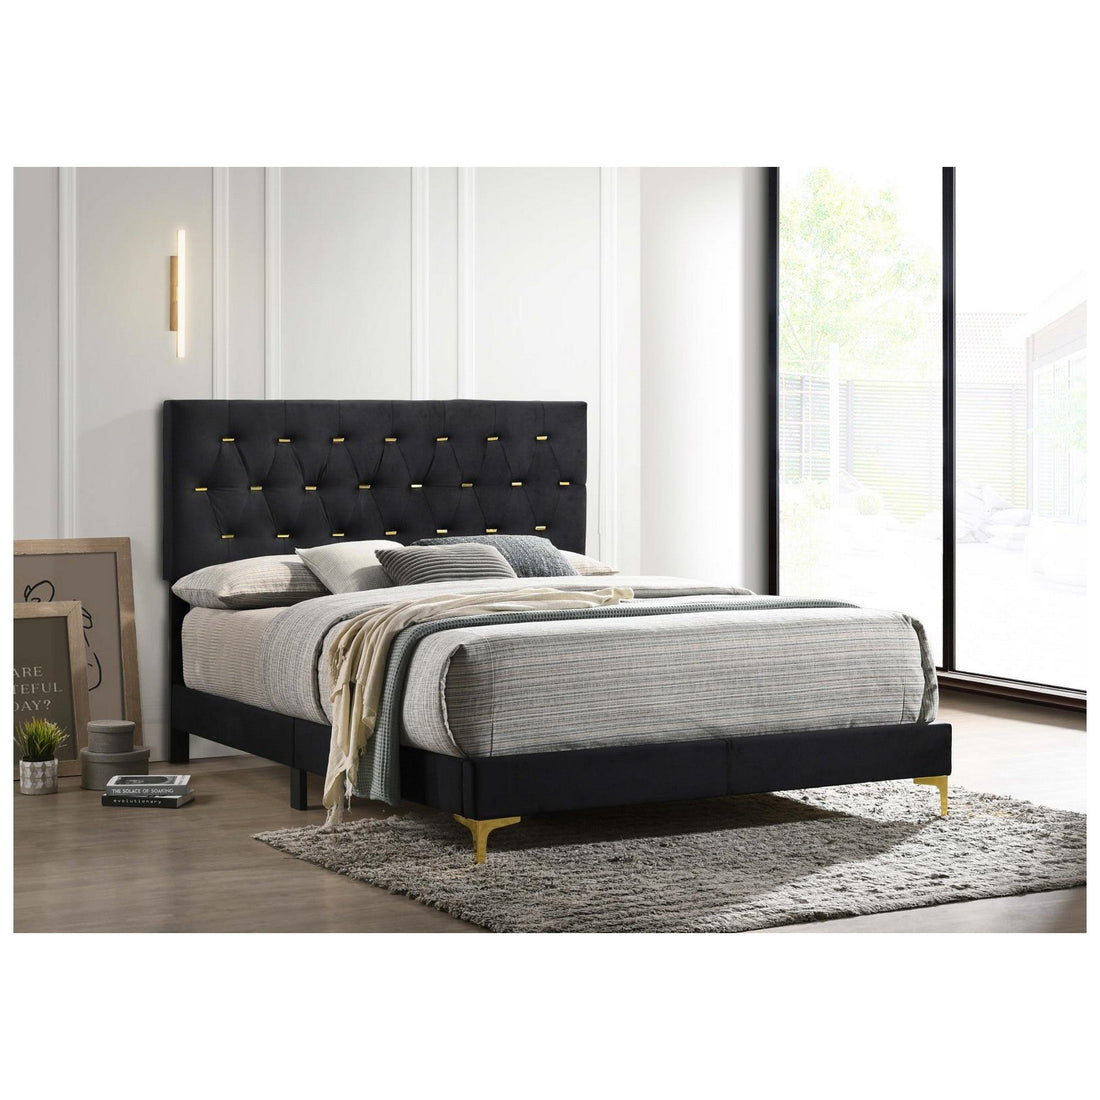 Kendall Tufted Panel Queen Bed Black and Gold 224451Q